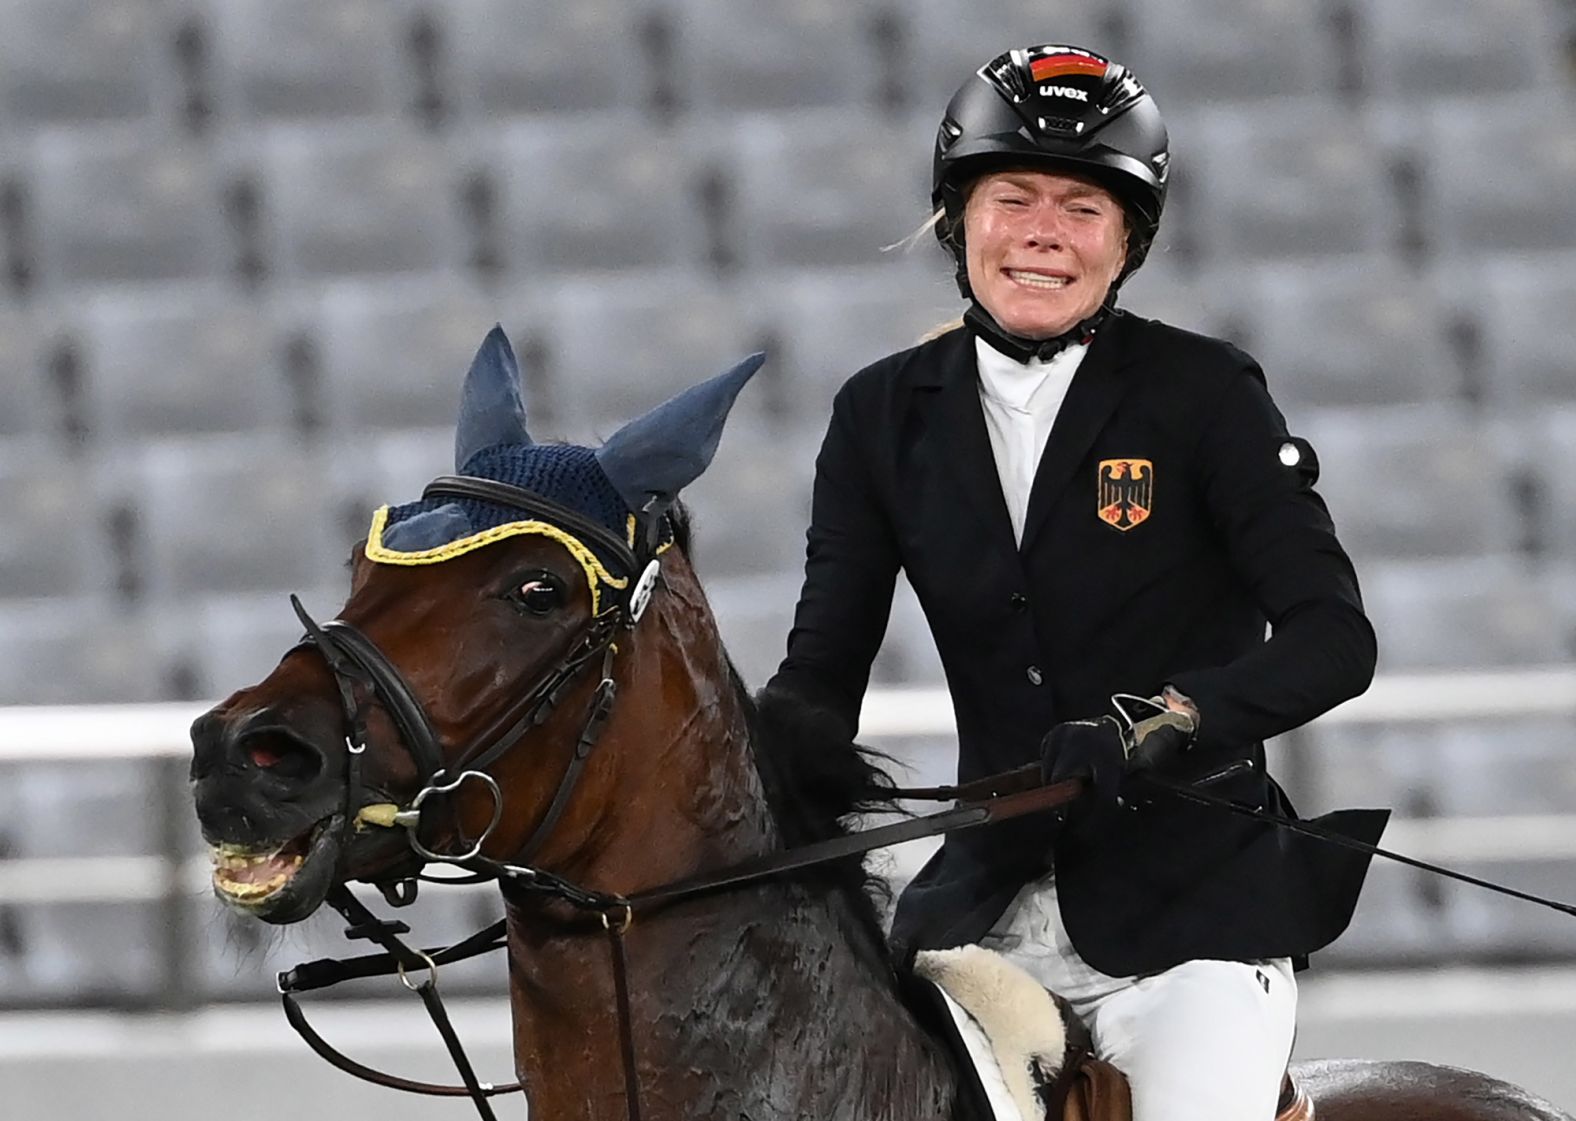 Germany's Annika Schleu was leading the modern pentathlon after two events. But in the show jumping event on August 6, her horse, Saint Boy, refused to cooperate with her wishes. The horse just wouldn't jump, and <a href="index.php?page=&url=https%3A%2F%2Fwww.cnn.com%2Fworld%2Flive-news%2Ftokyo-2020-olympics-08-06-21-spt%2Fh_e2ea37082eedb53e79deba154d931c9b" target="_blank">Schleu broke into tears</a> as her medal hopes faded away. In the modern pentathlon, horses are assigned to athletes via a draw.